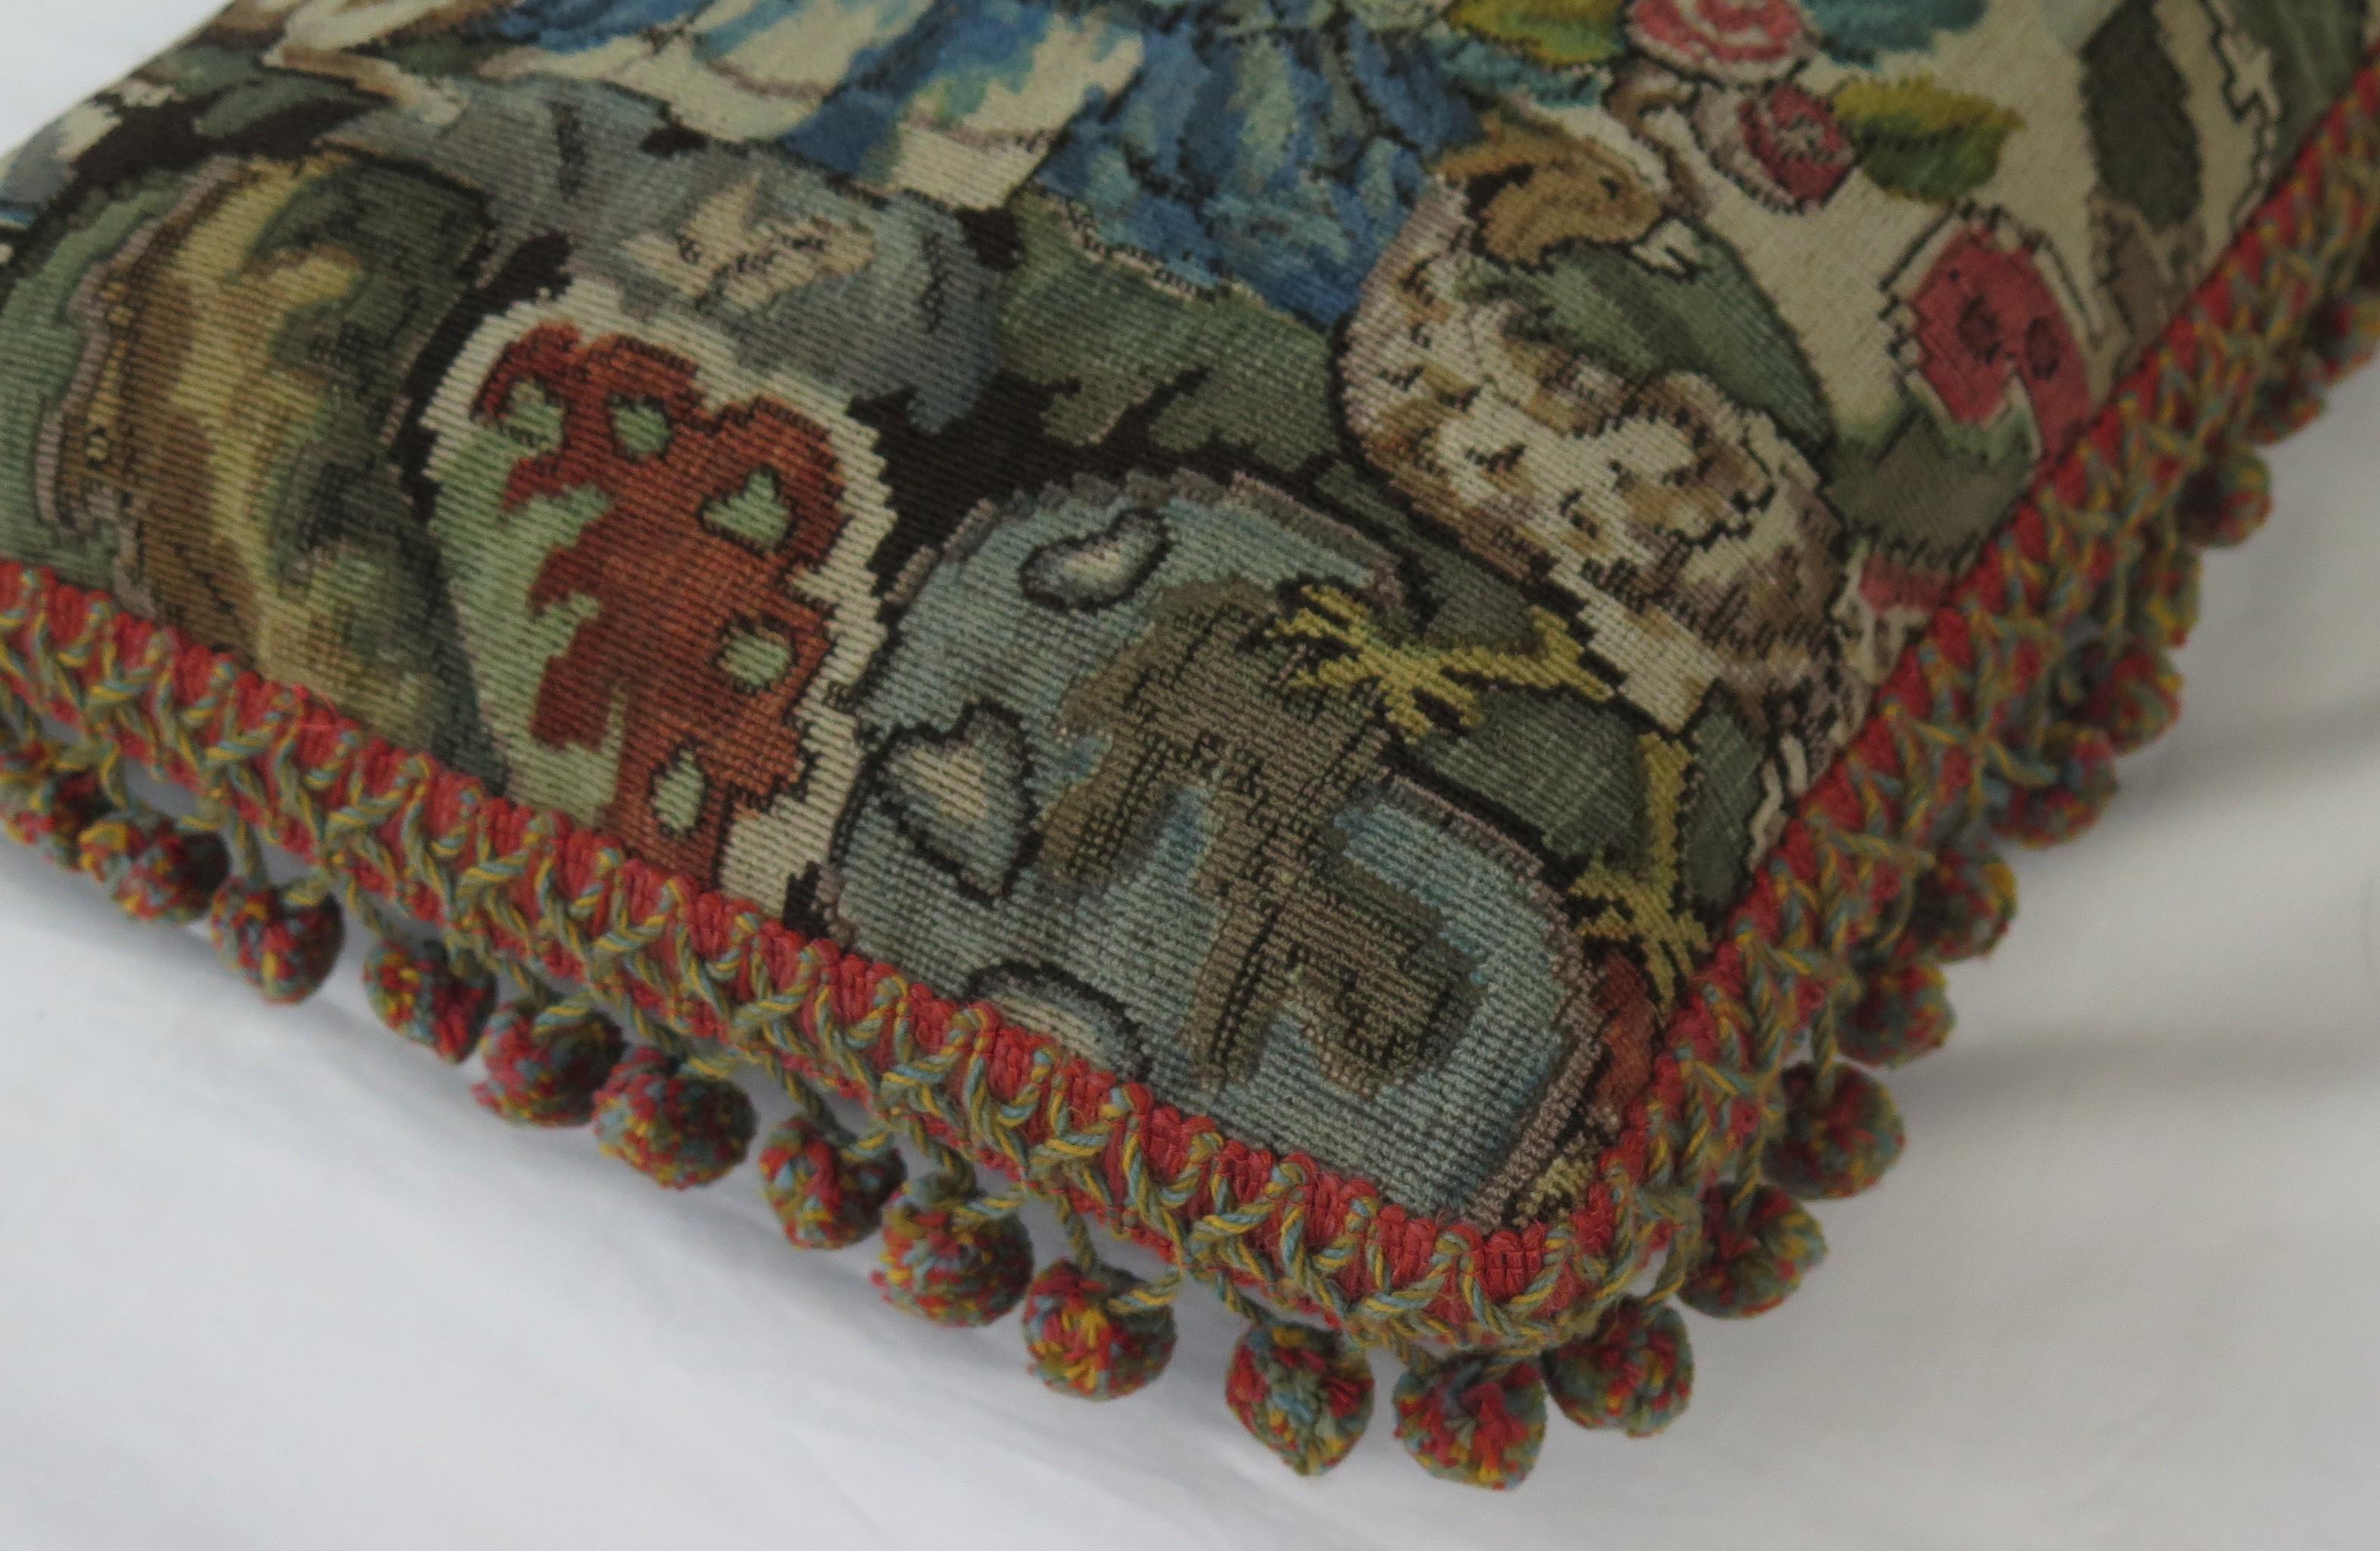 Woven Tapestry Cushion or Pillow in Aubusson style, French, 19th Century 9